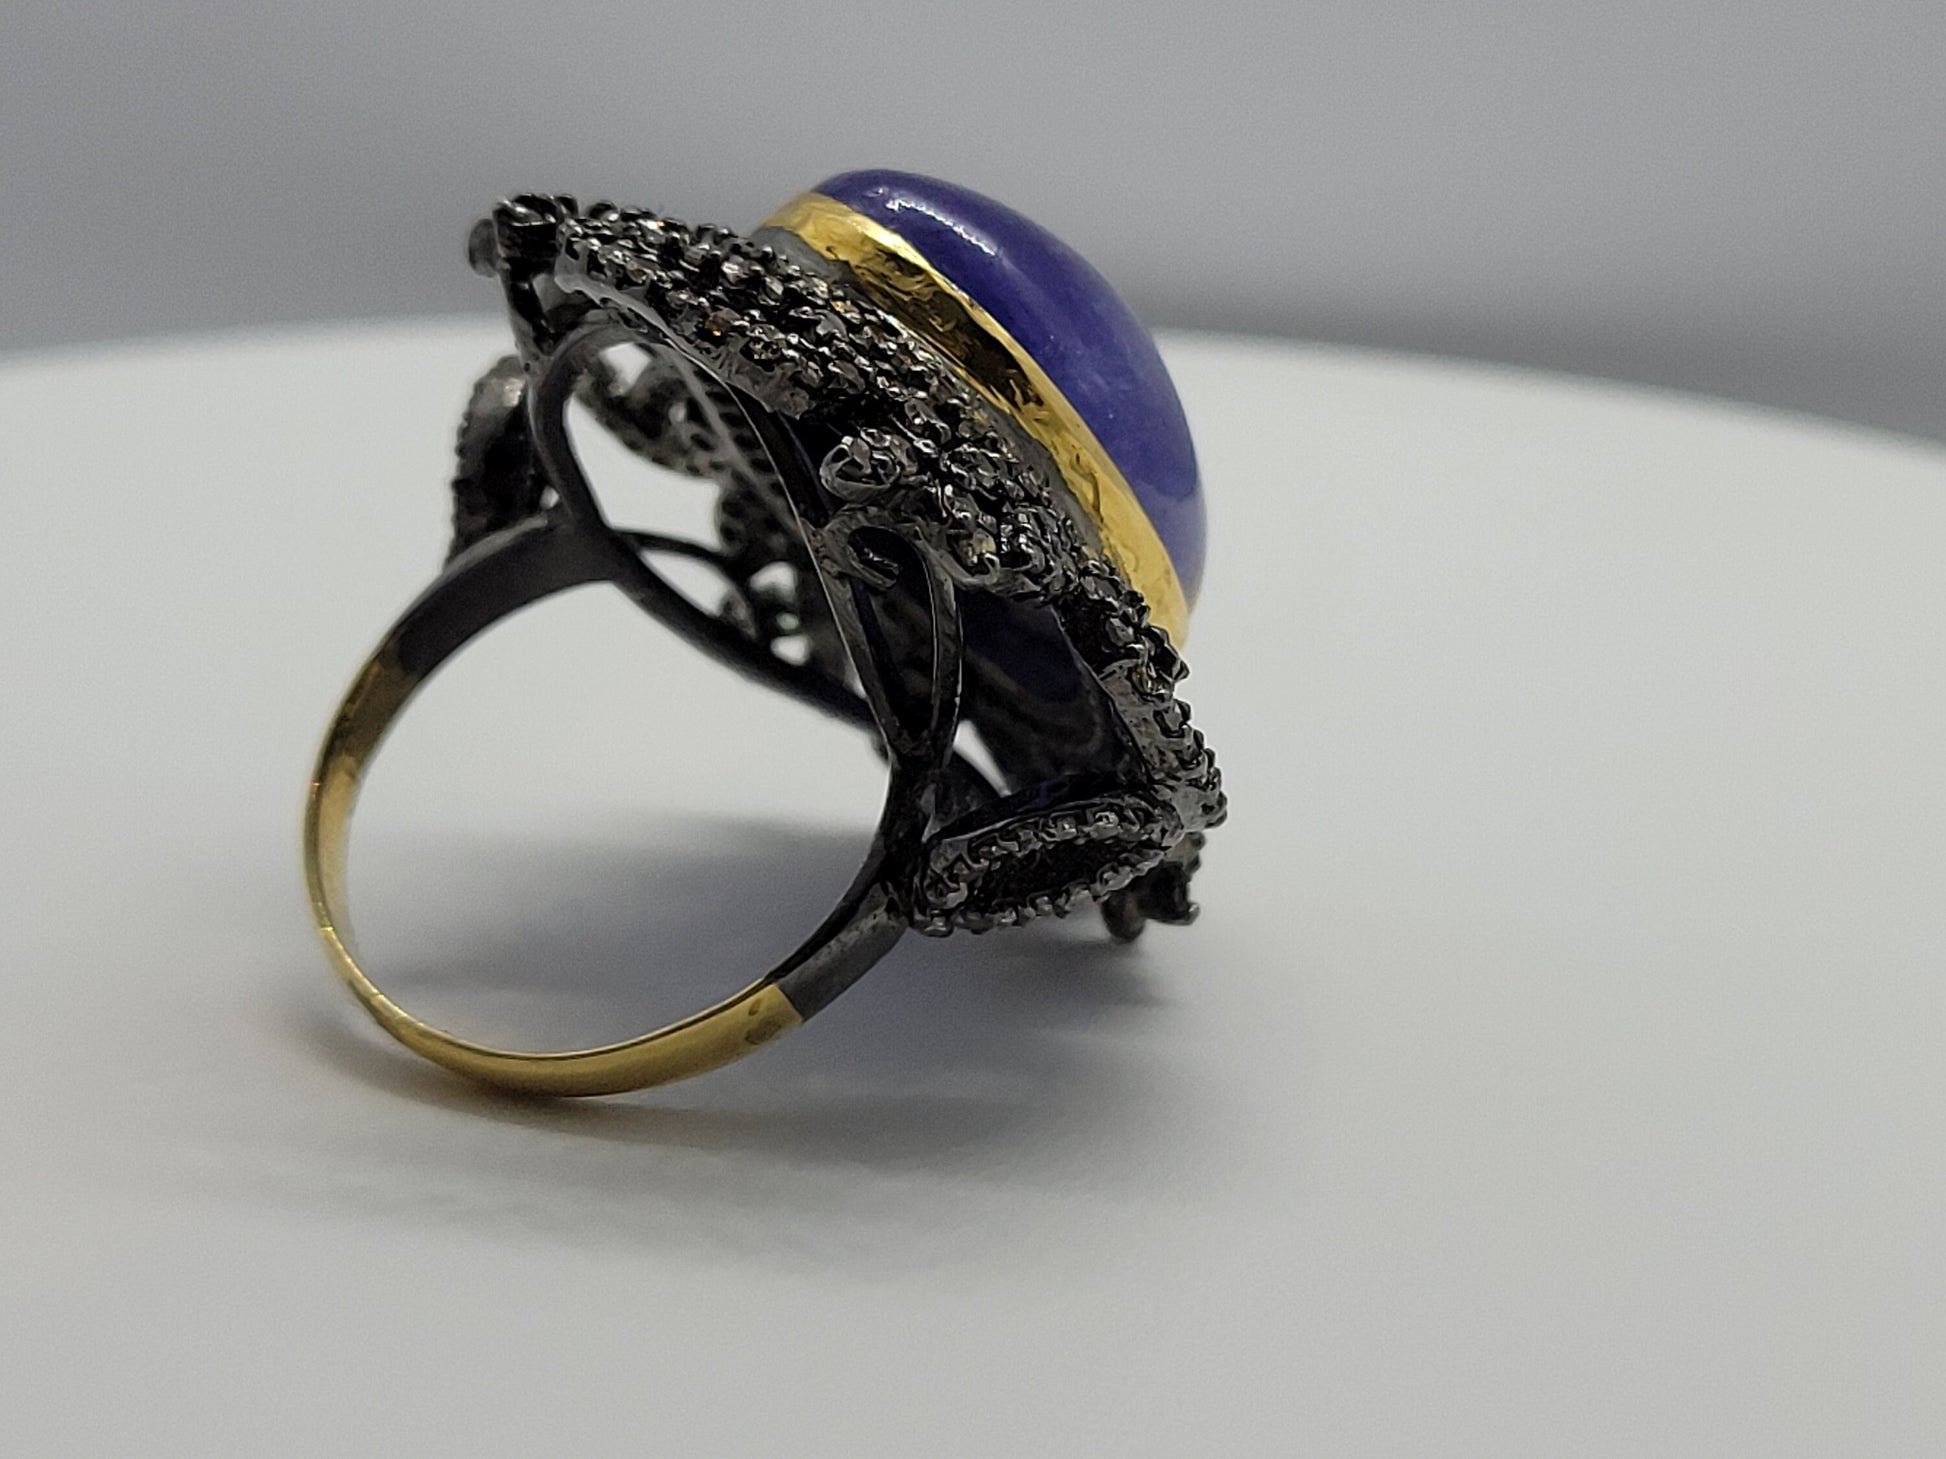 Vintage Blue Tanzanite with Diamonds in 925 Sterling Silver and 18k Gold Ring Genuine Tanzanite Genuine Diamond Revival Collection